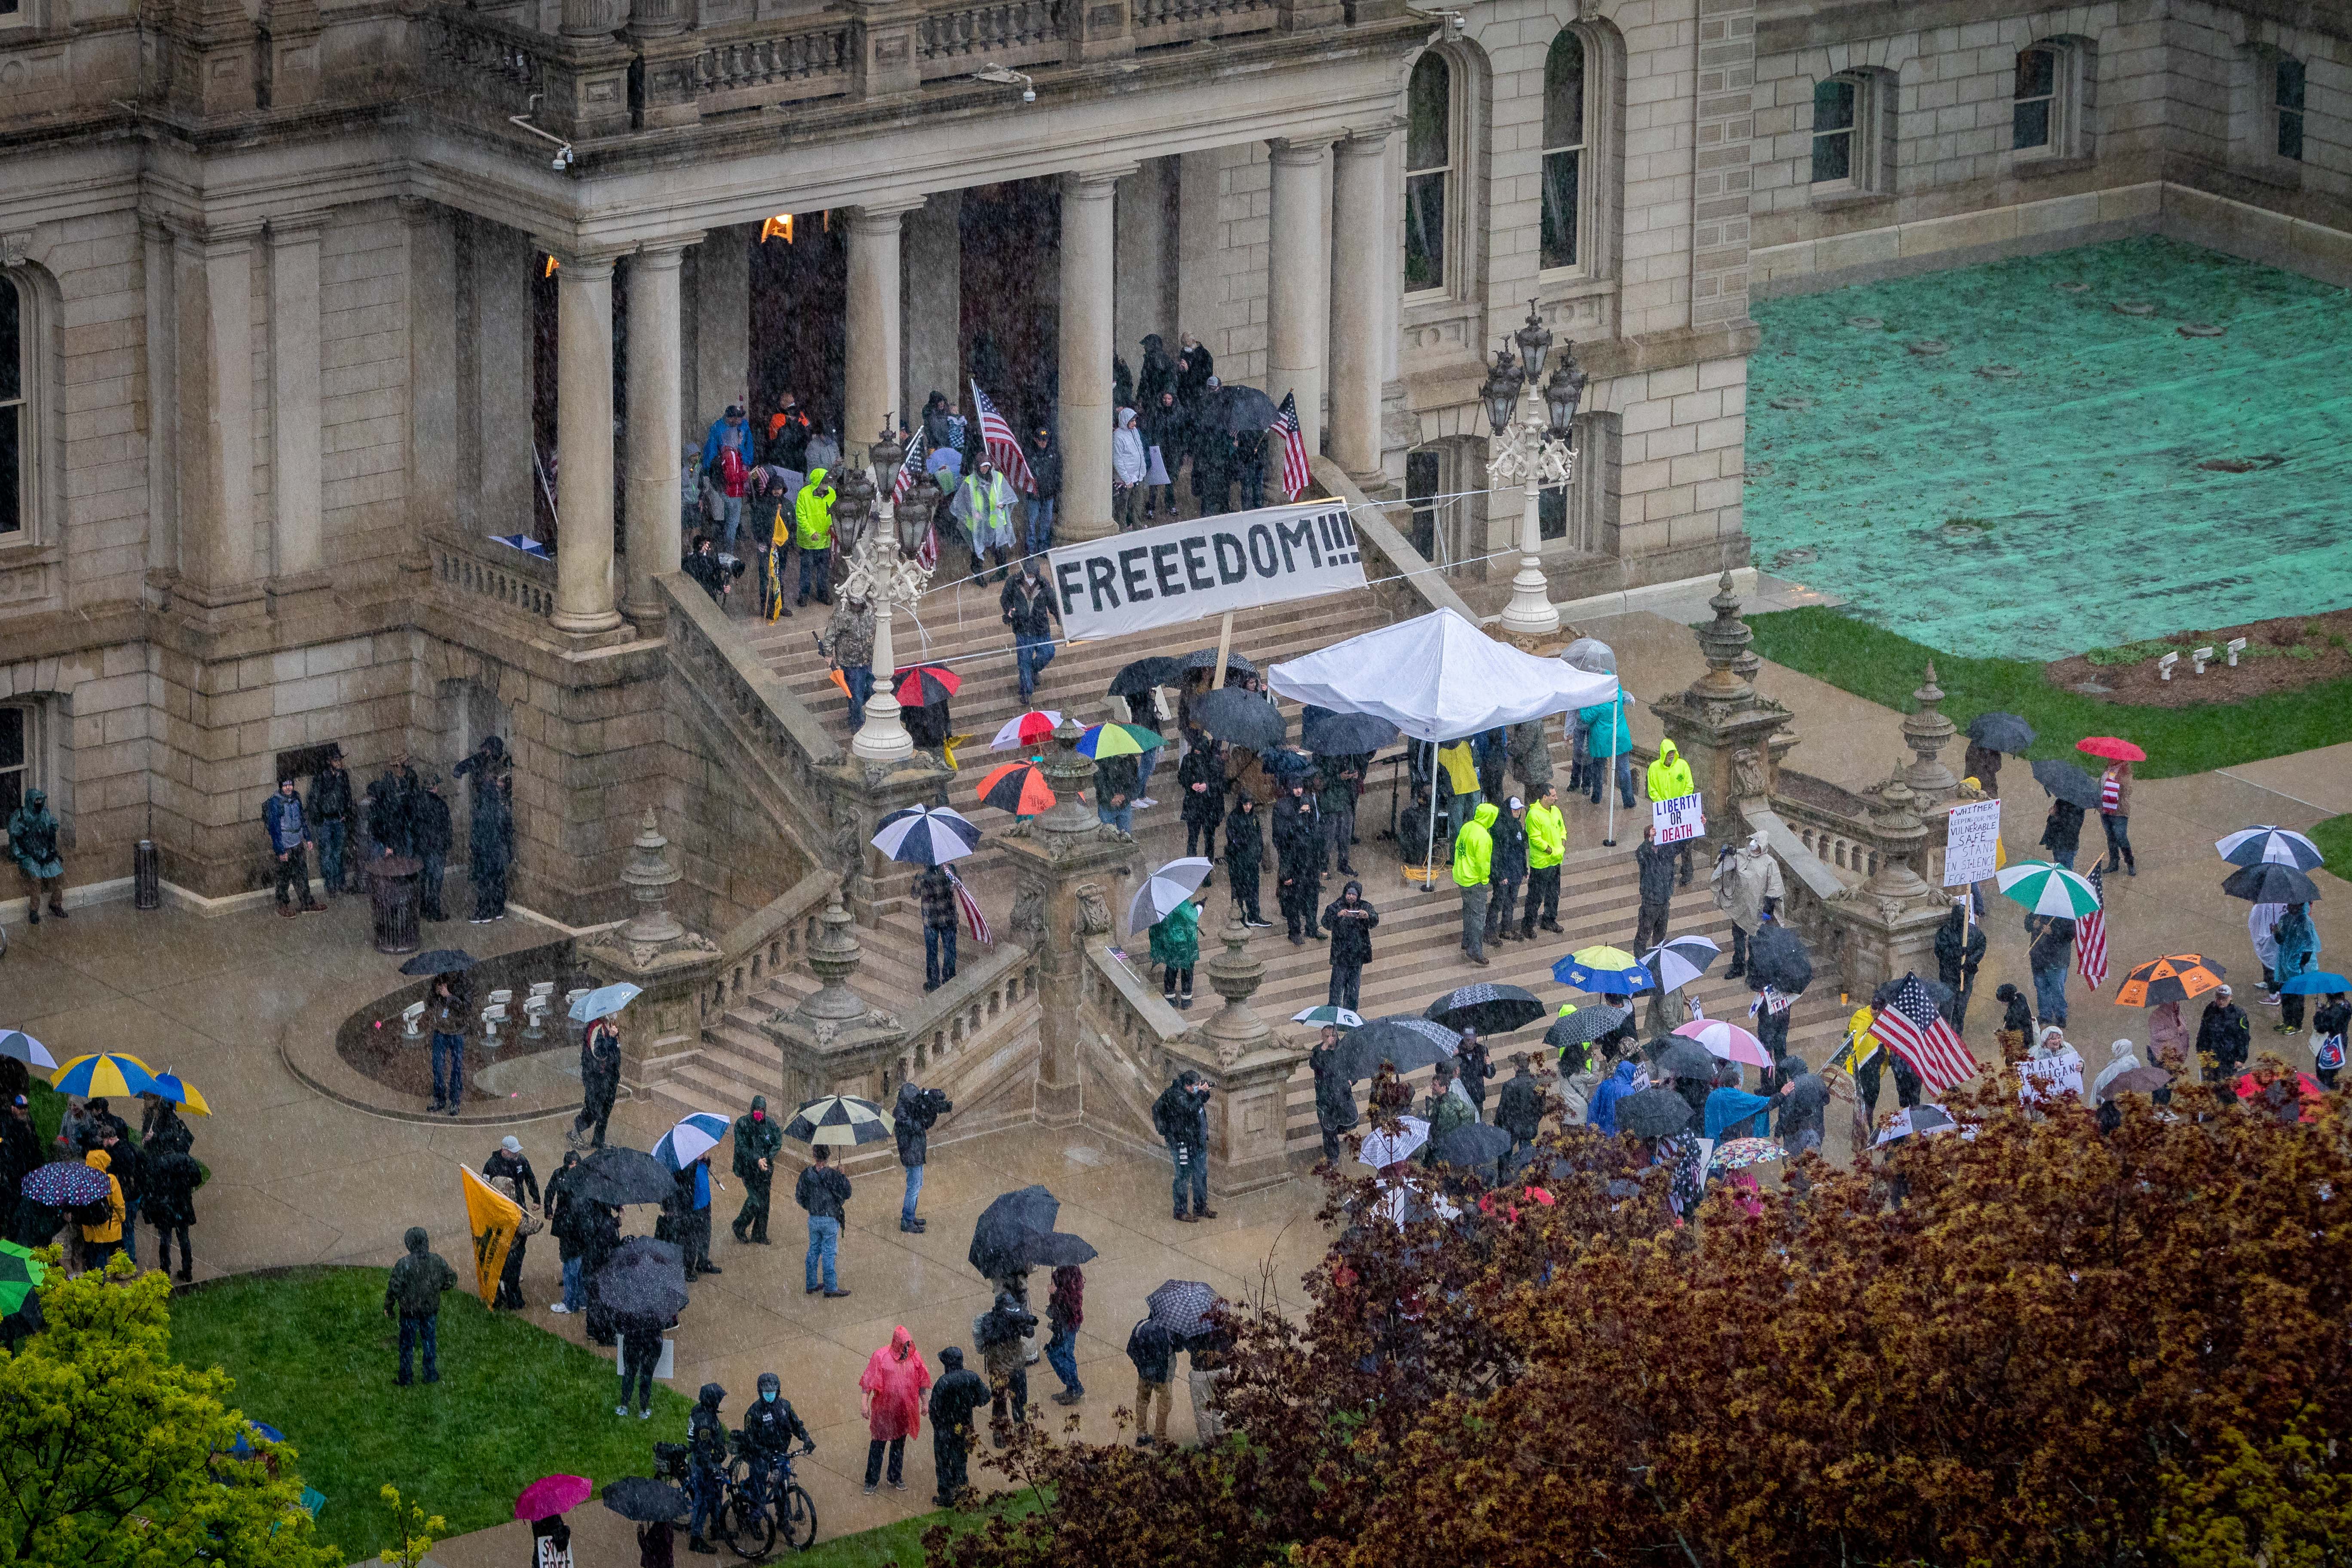 Protesters descend on the Michigan Capitol building to oppose the executive orders Governor Gretchen Whitmer issued in response to the coronavirus pandemic.